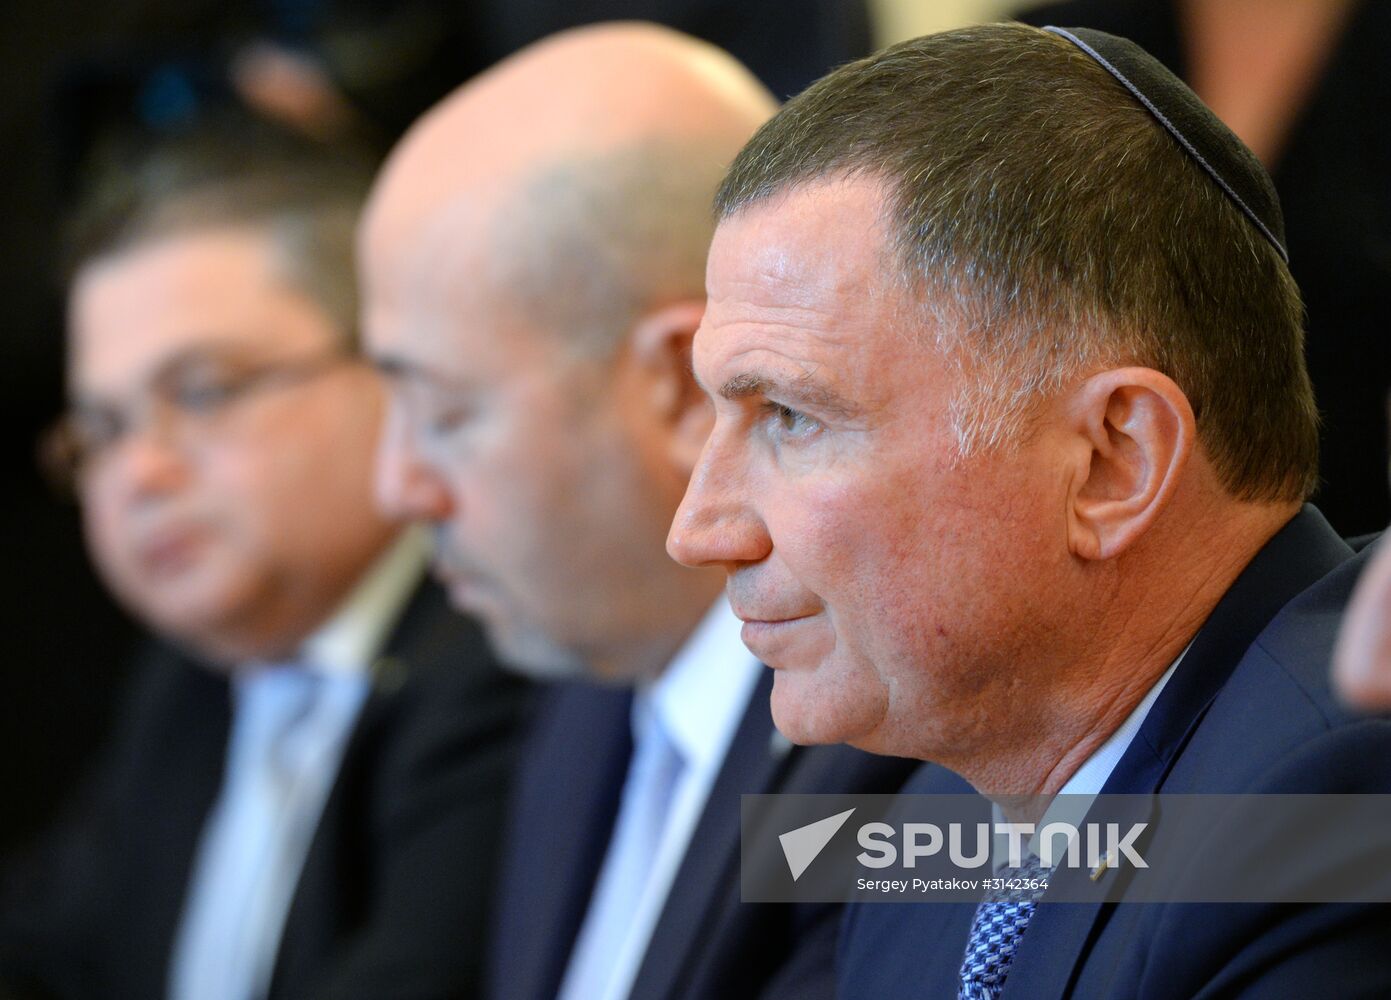 Russian Foreign Minister Sergei Lavrov meets with Knesset Speaker Yuli Edelstein